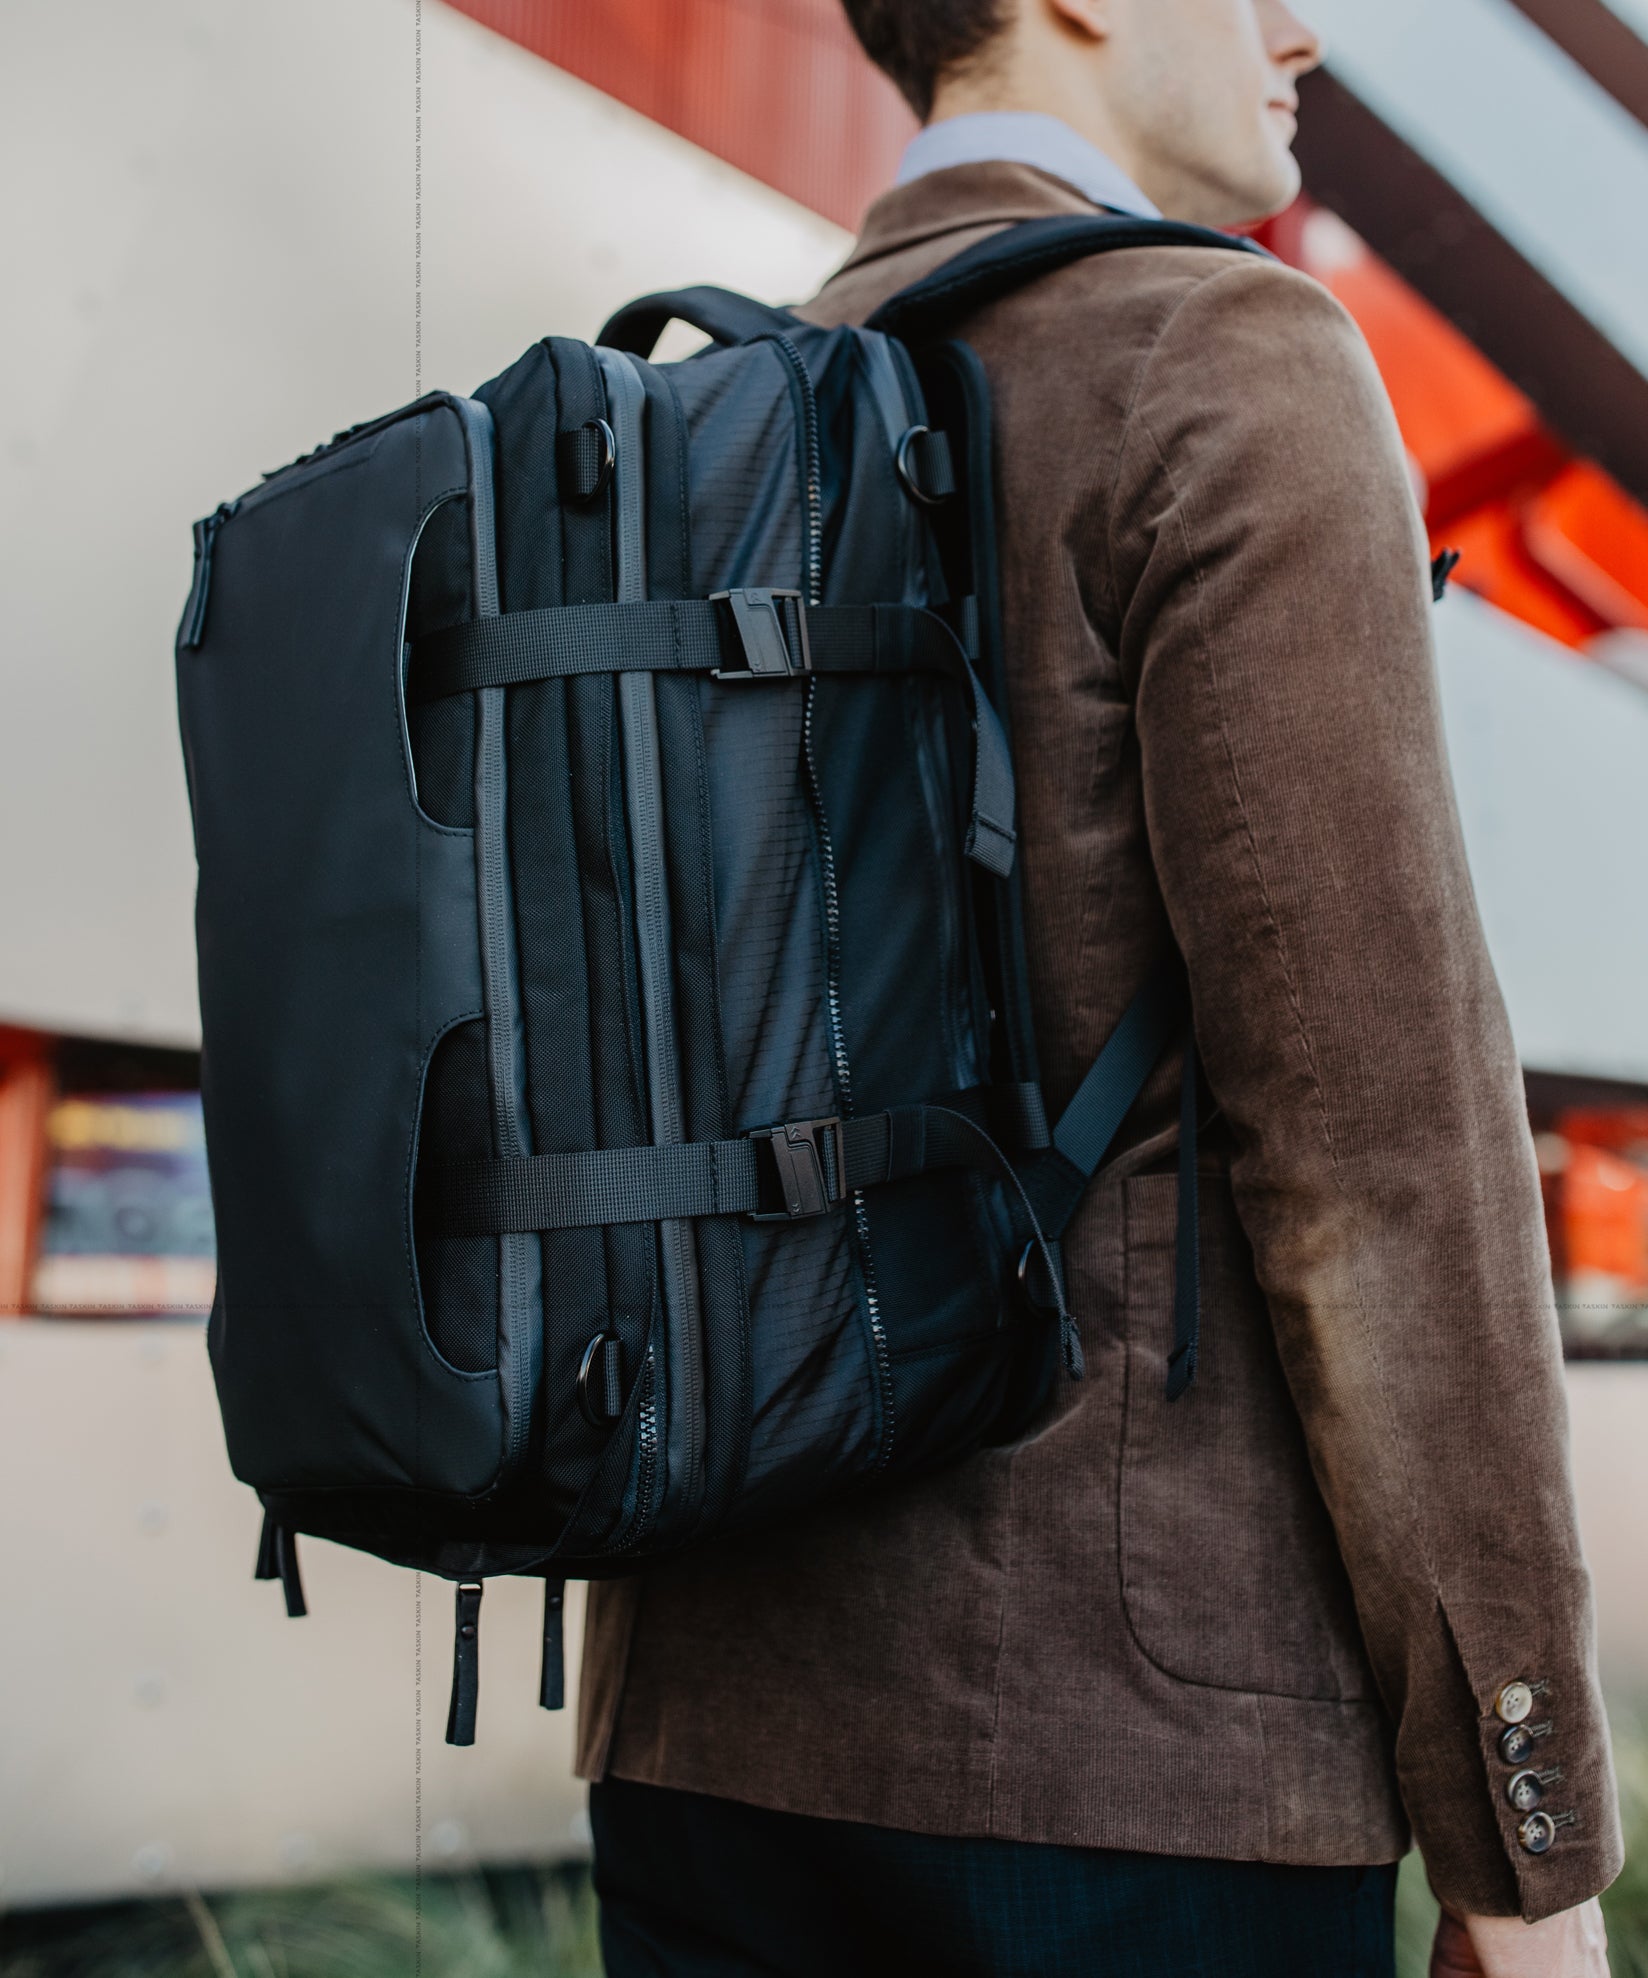 What's In Your Bag: Remi! A backpack to fit all your office in one bag